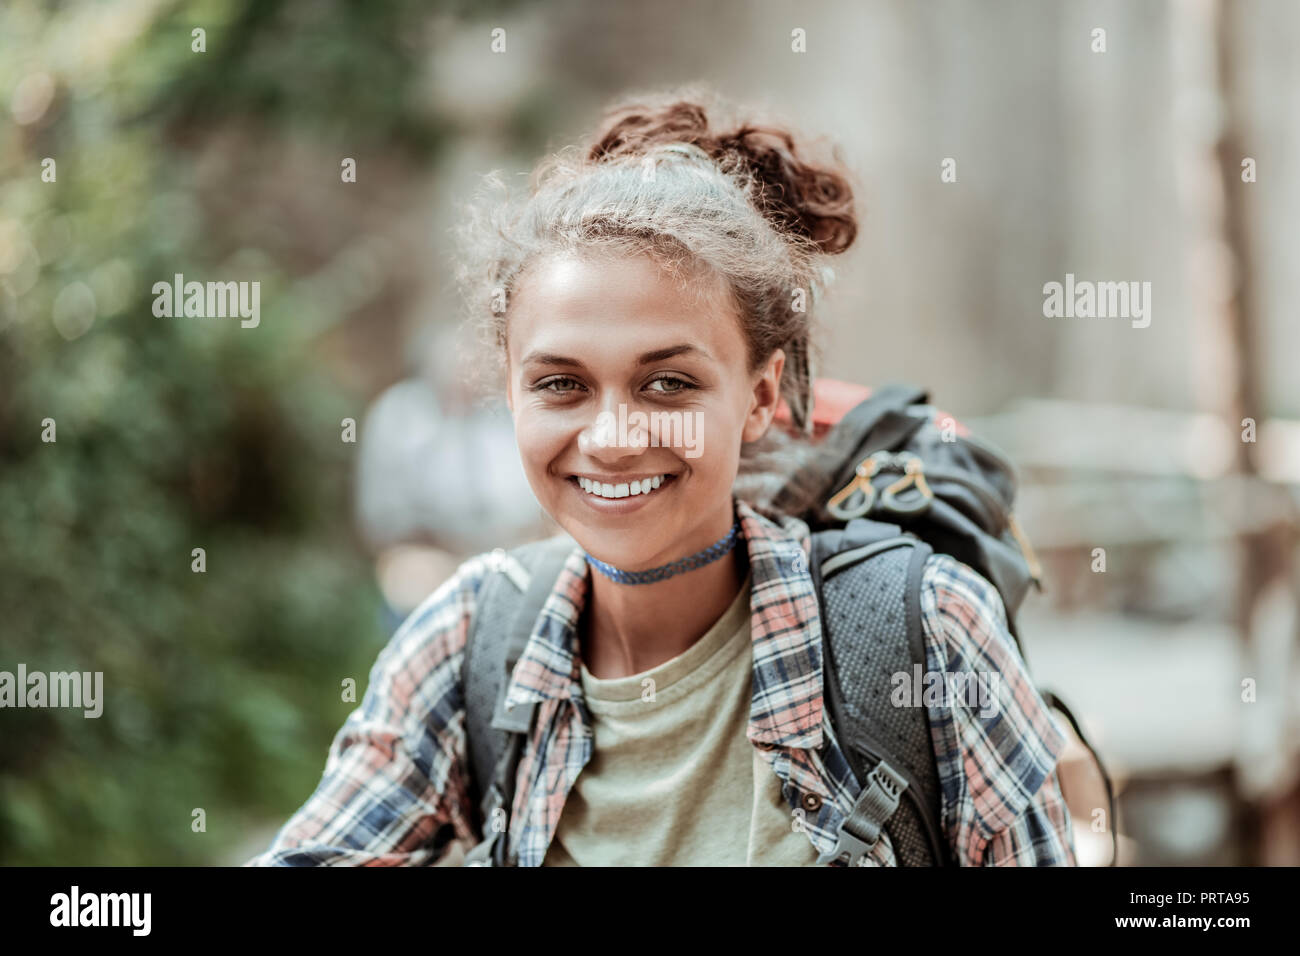 Close up of beaming smiling female backpacker enjoying her day greatly Stock Photo